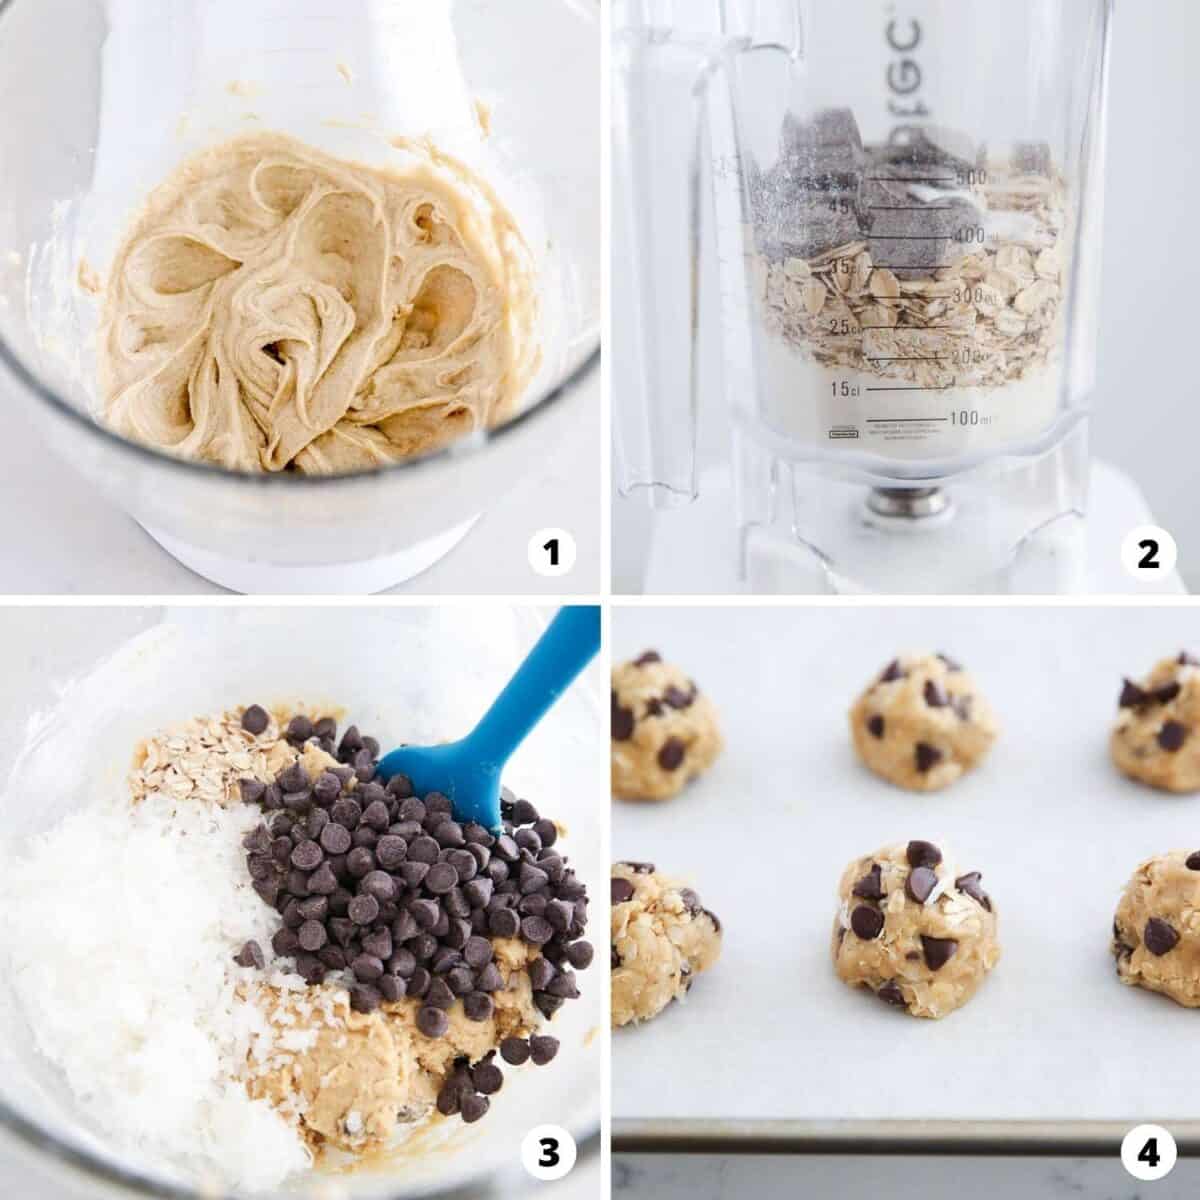 Showing how to make coconut chocolate chip cookies in a 4 step collage.